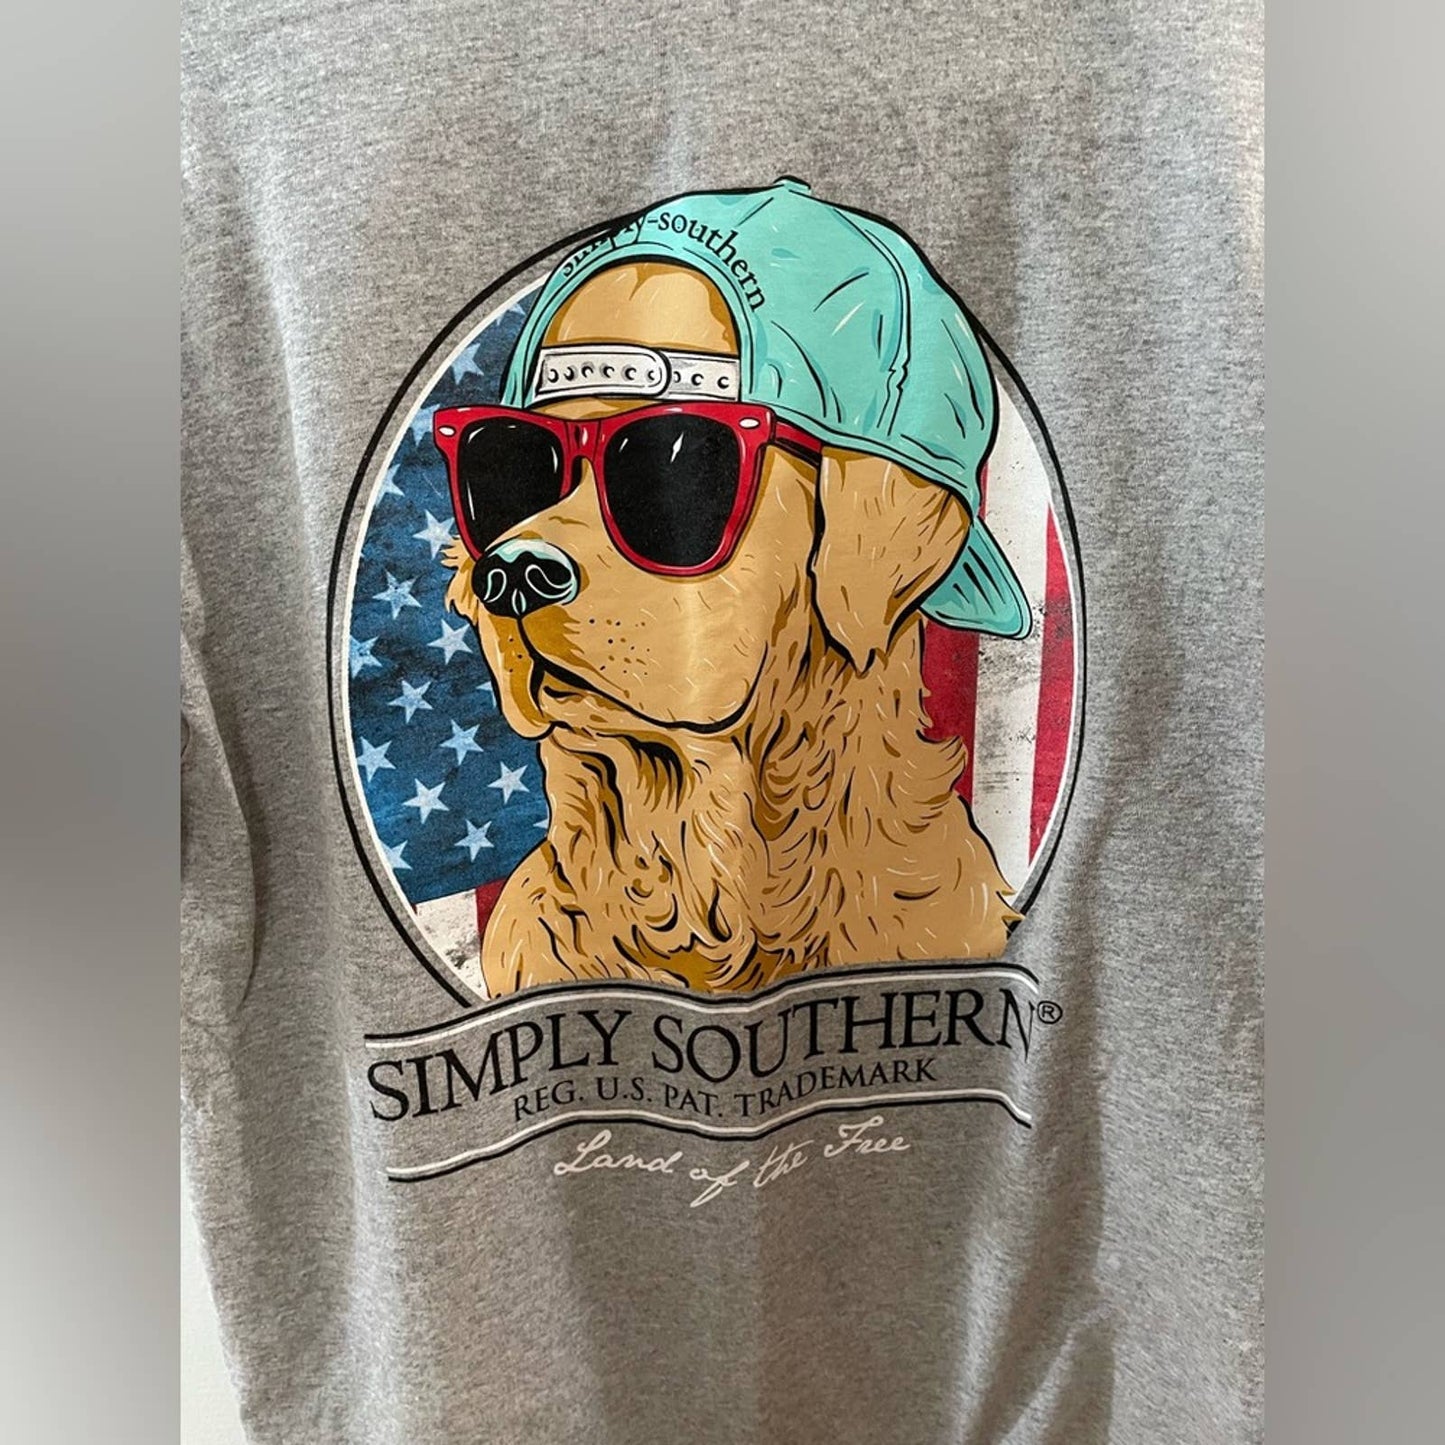 LG Gray Simply Southern Land of the Free Golden Retriever T-Shirt